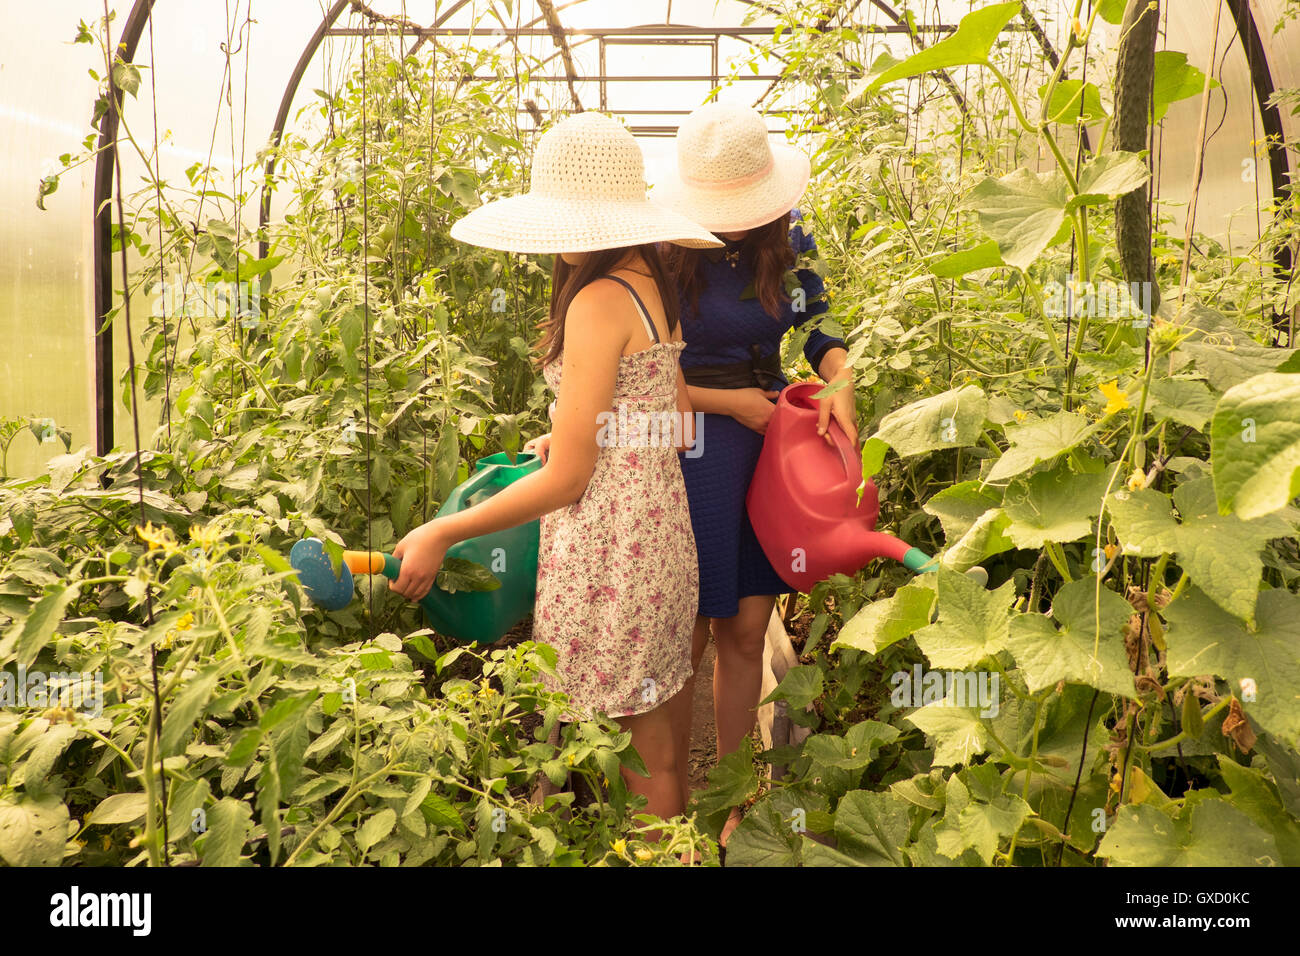 Two females wearing sun hats, using watering can to water plants in greenhouse Stock Photo